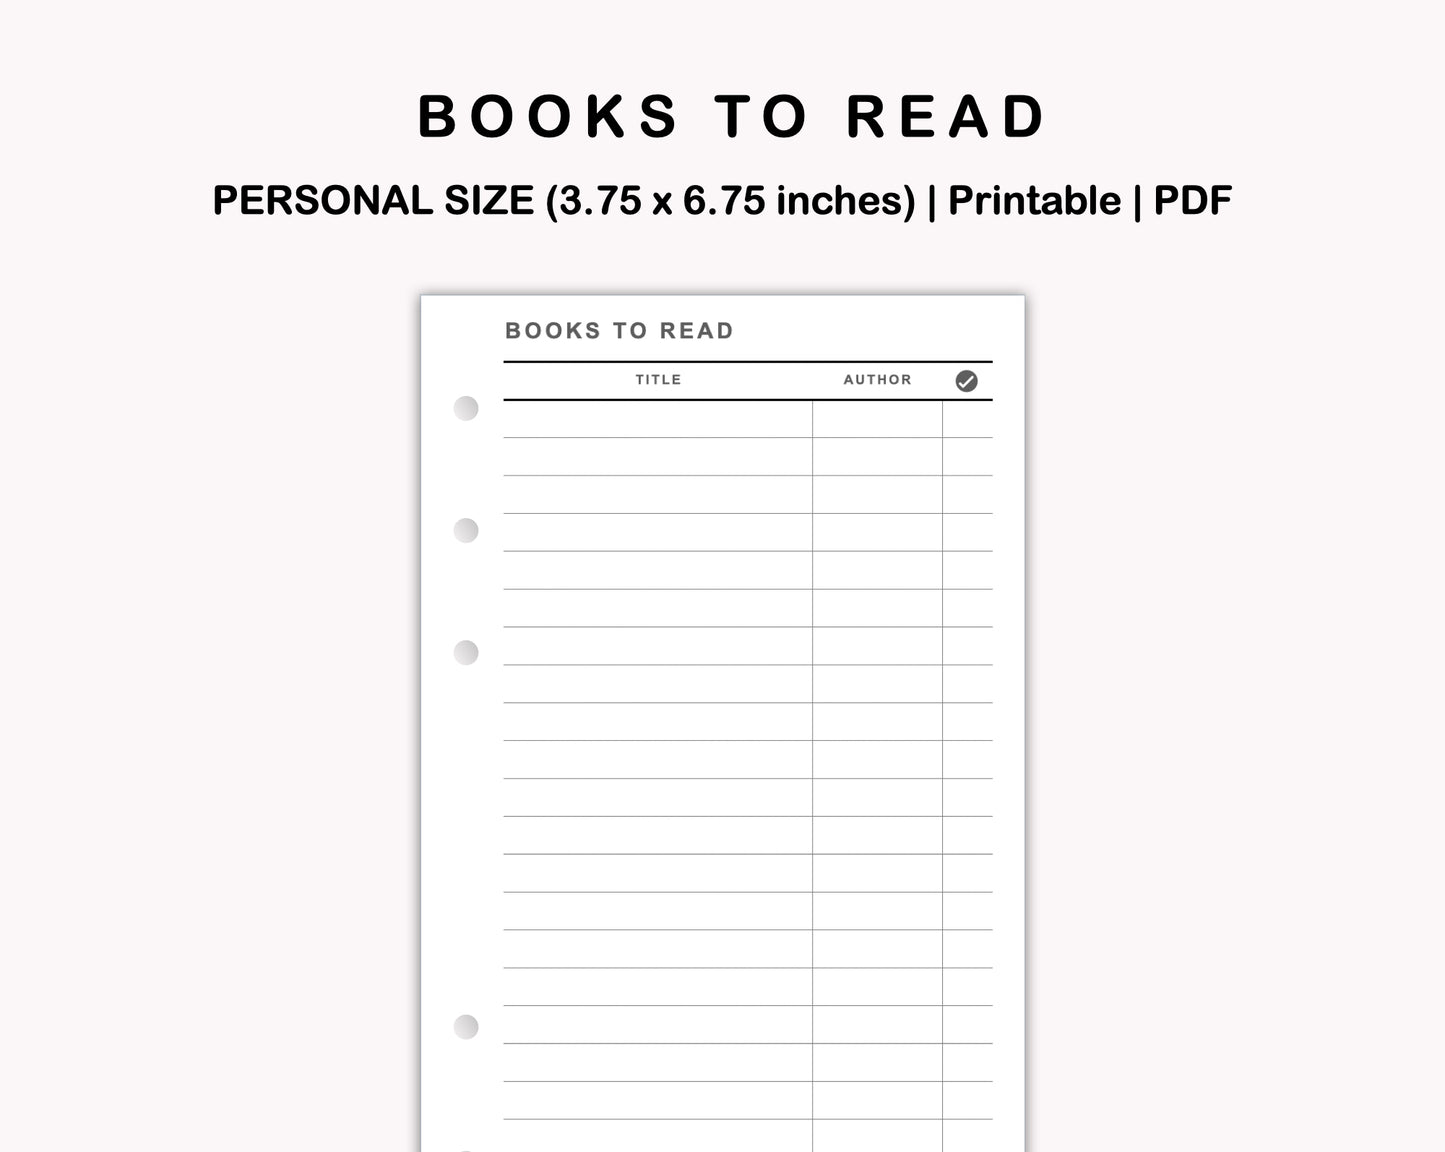 Personal Inserts - Books to read